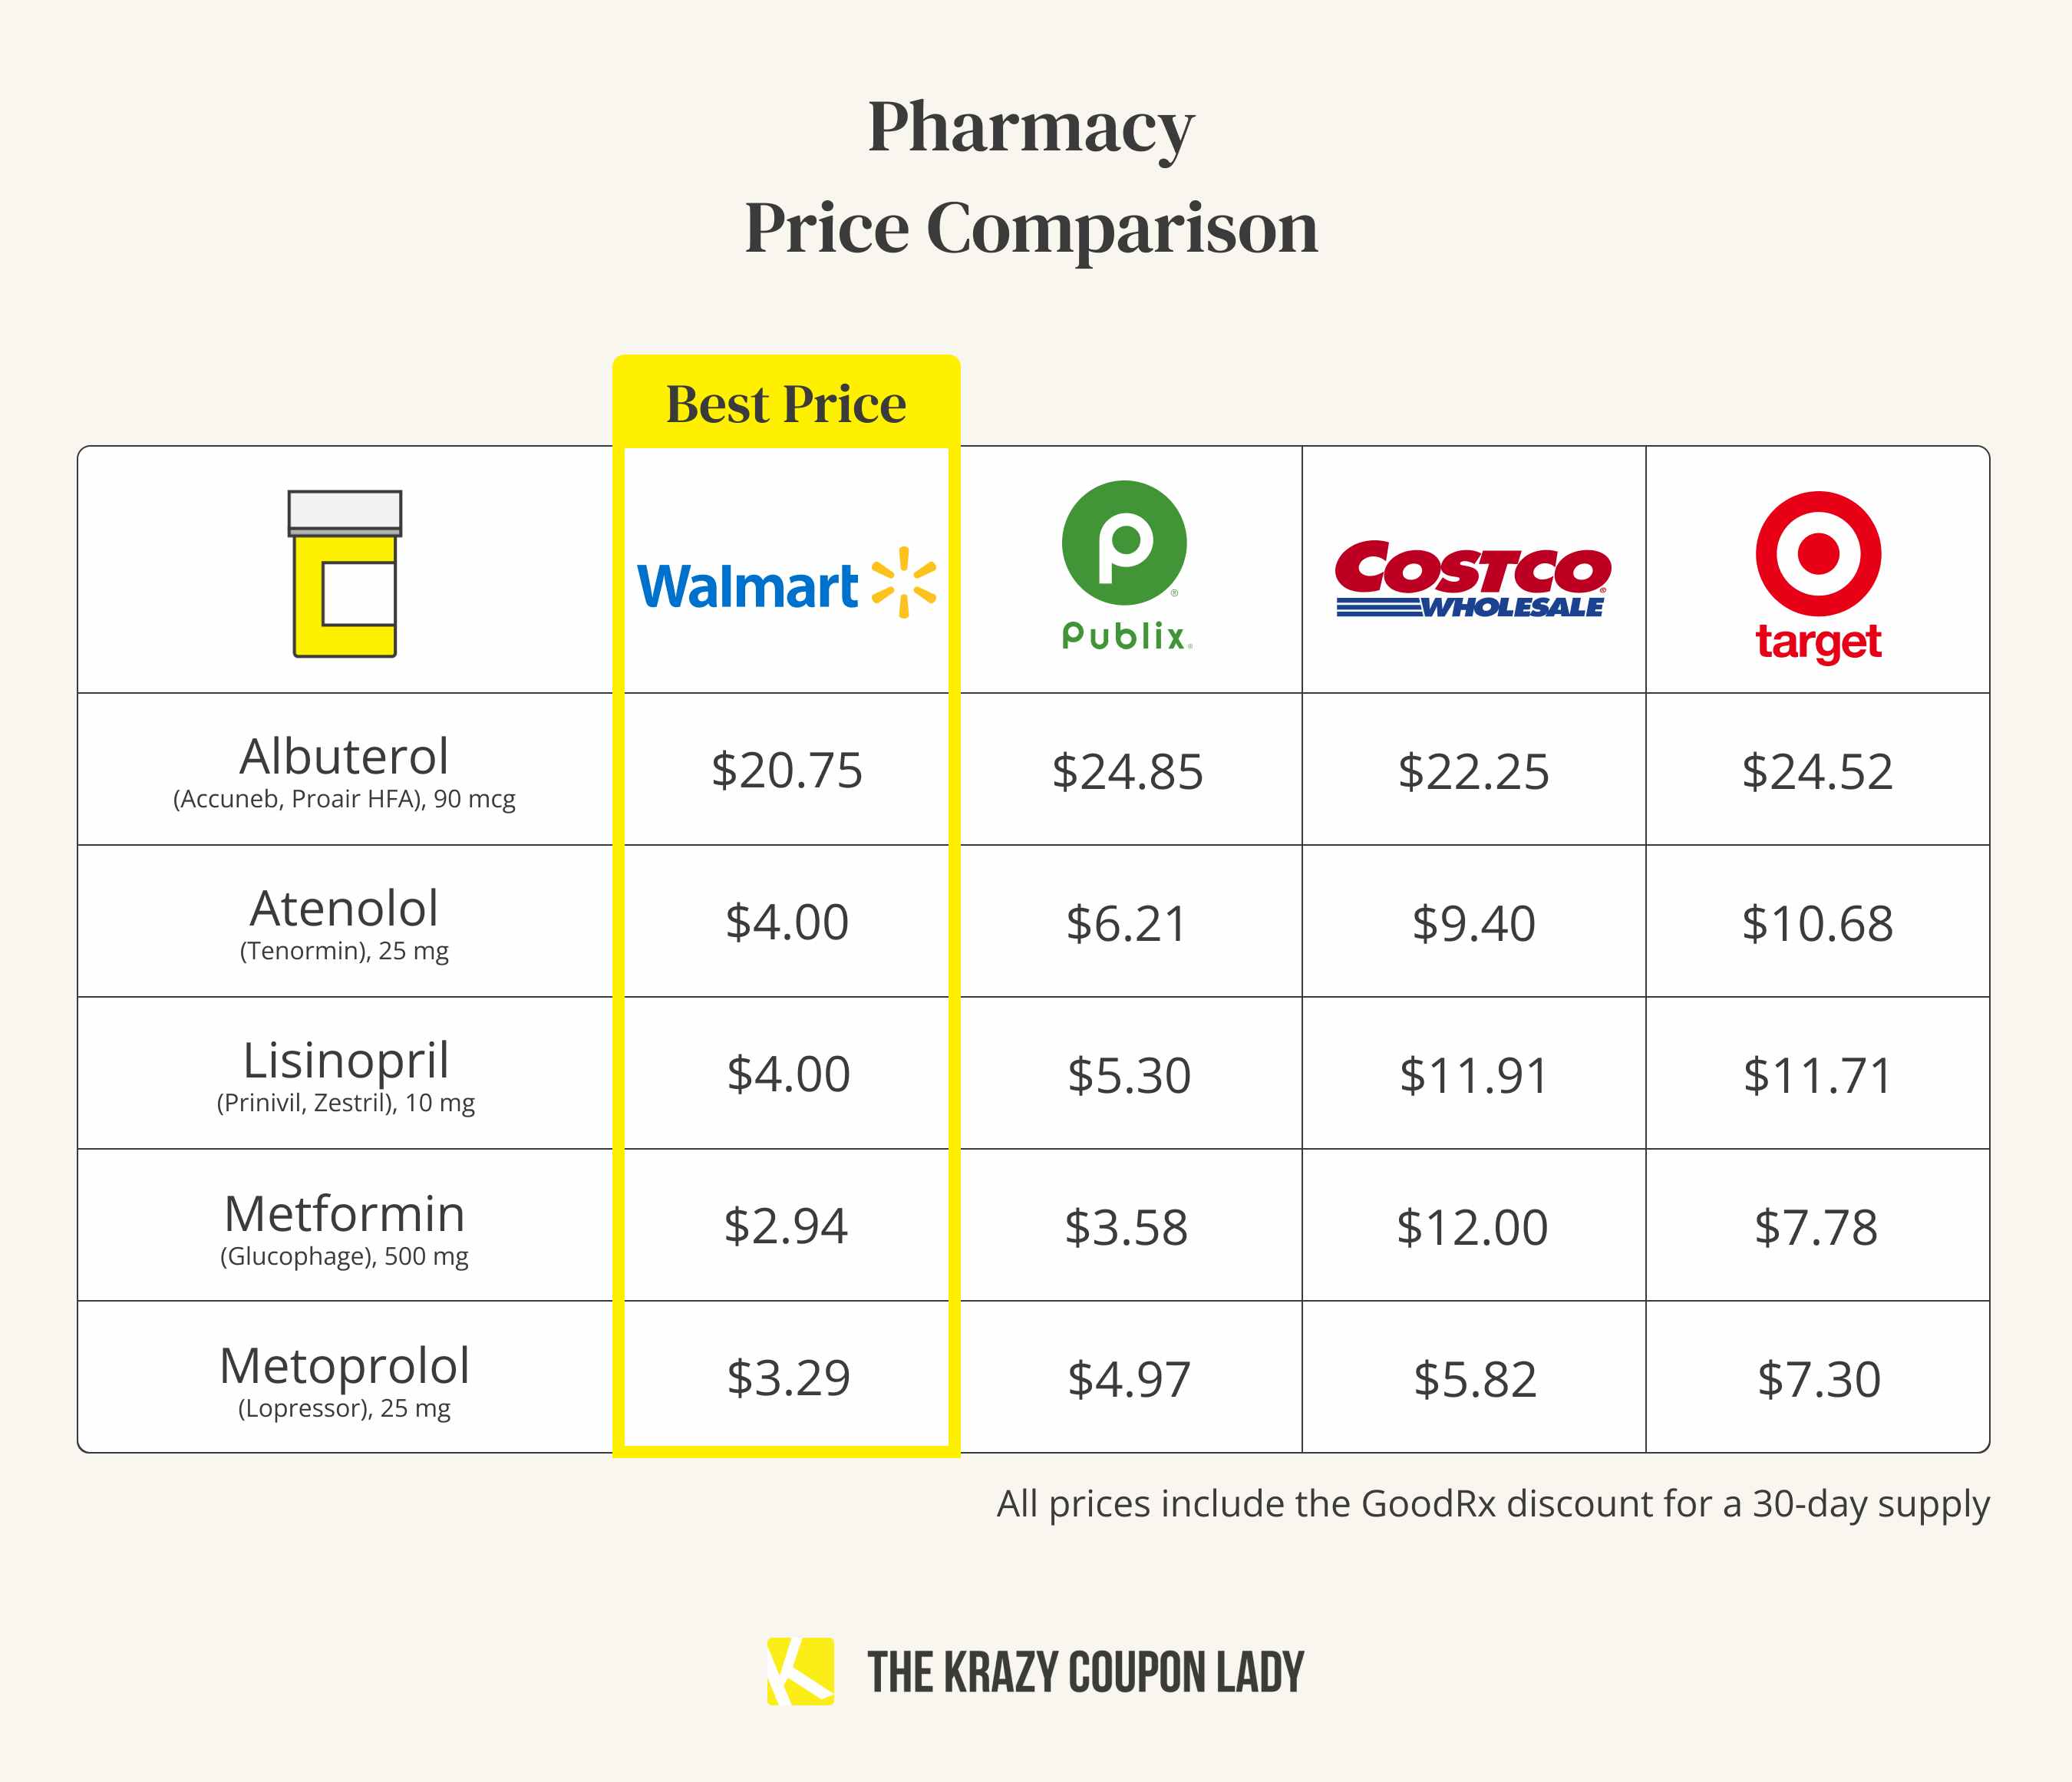 The price of drugs at Walmart Pharmacy compared to other pharmacy prices.